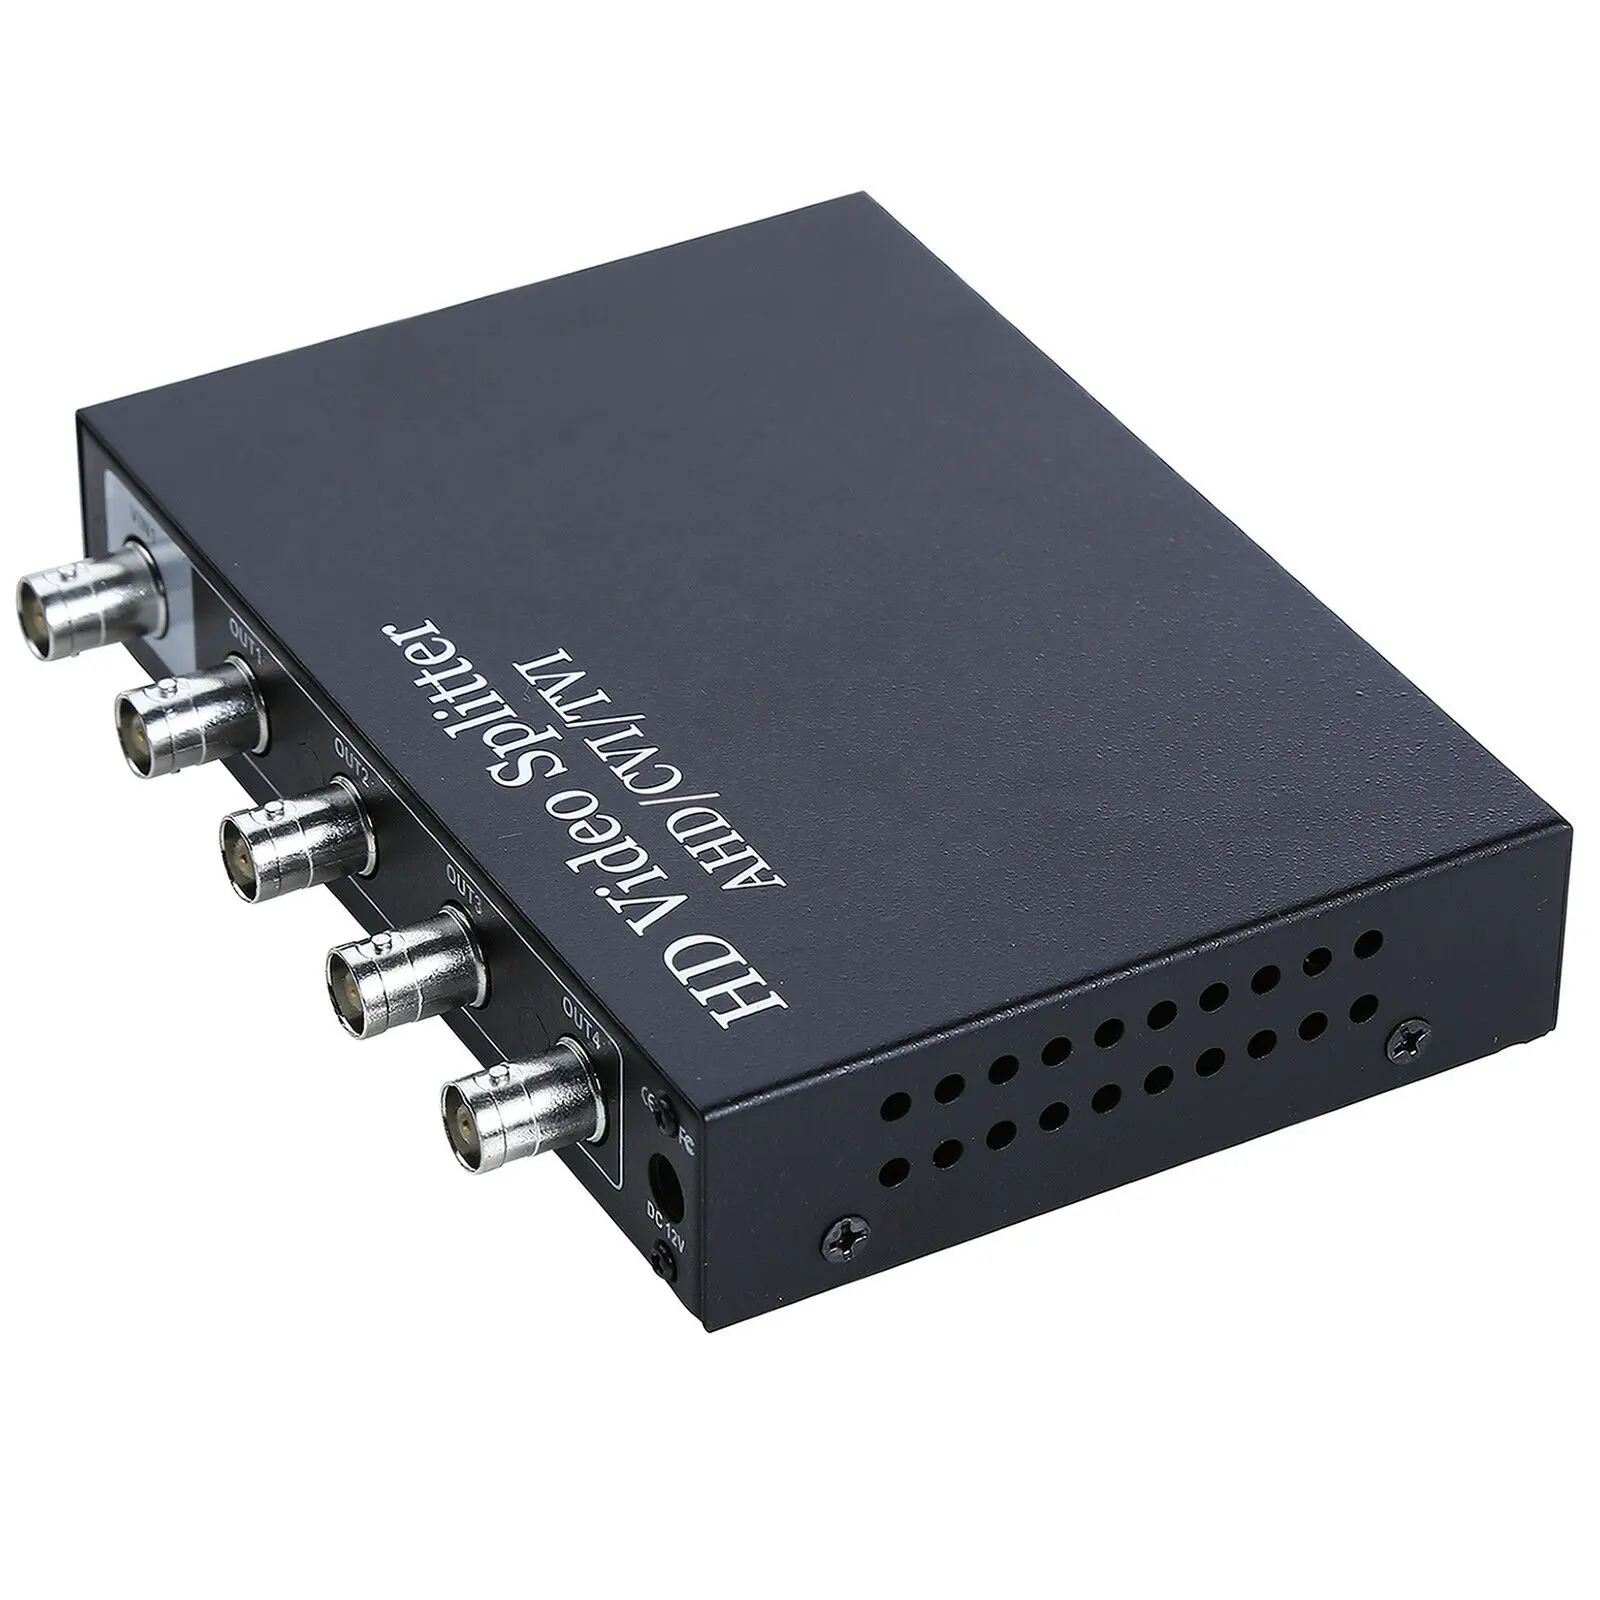 1 Input 4 Output BNC Video Splitter Box Coaxial Distributor Amplifier for Video Monitoring System CCTV Security Camera